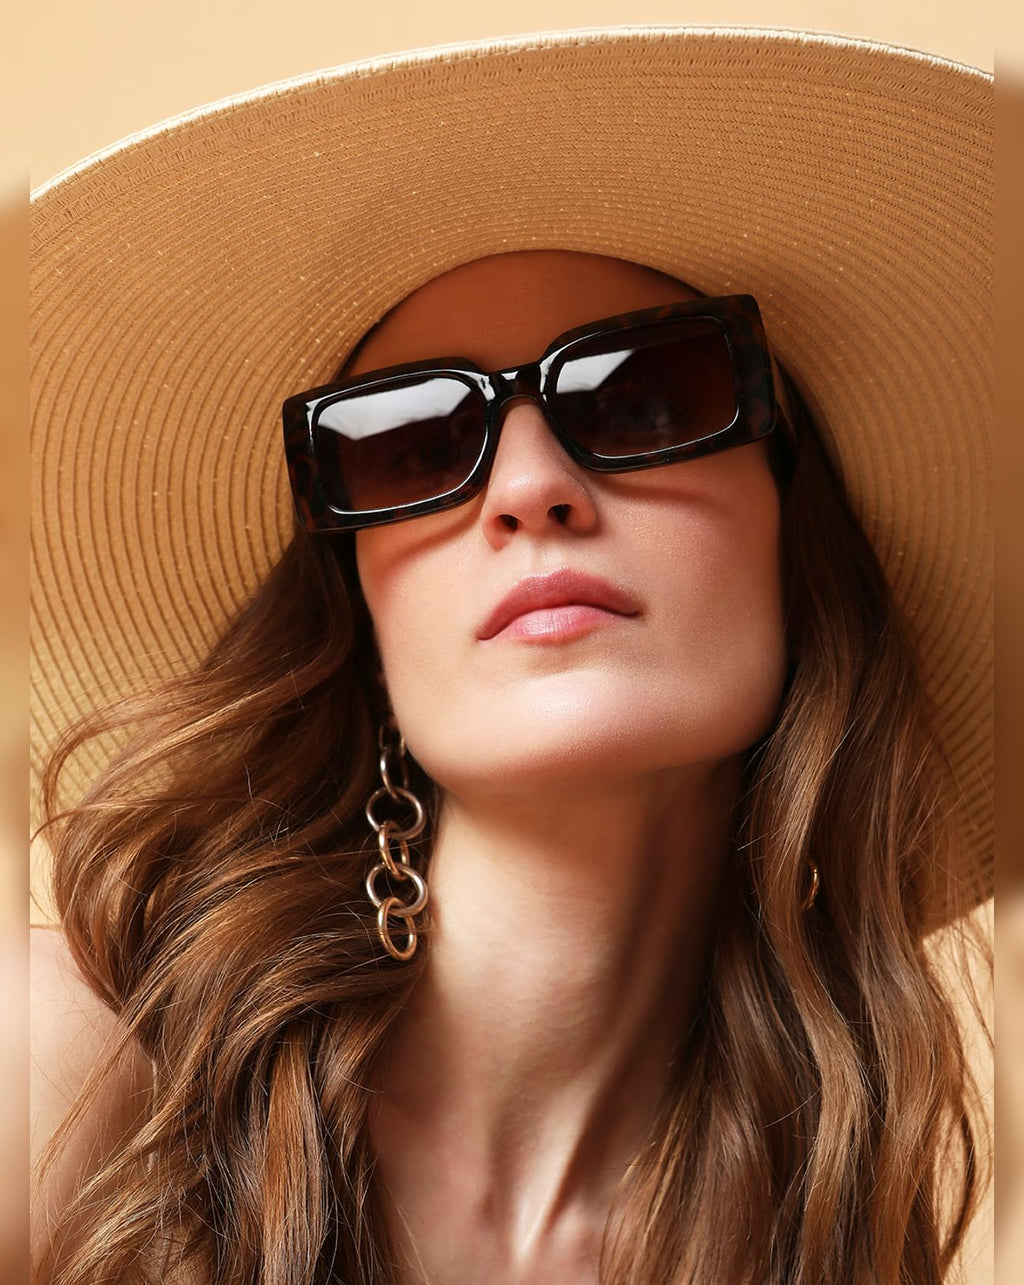 The Beach Company - Travel Accessories - Sunglasses Online for Beach Use